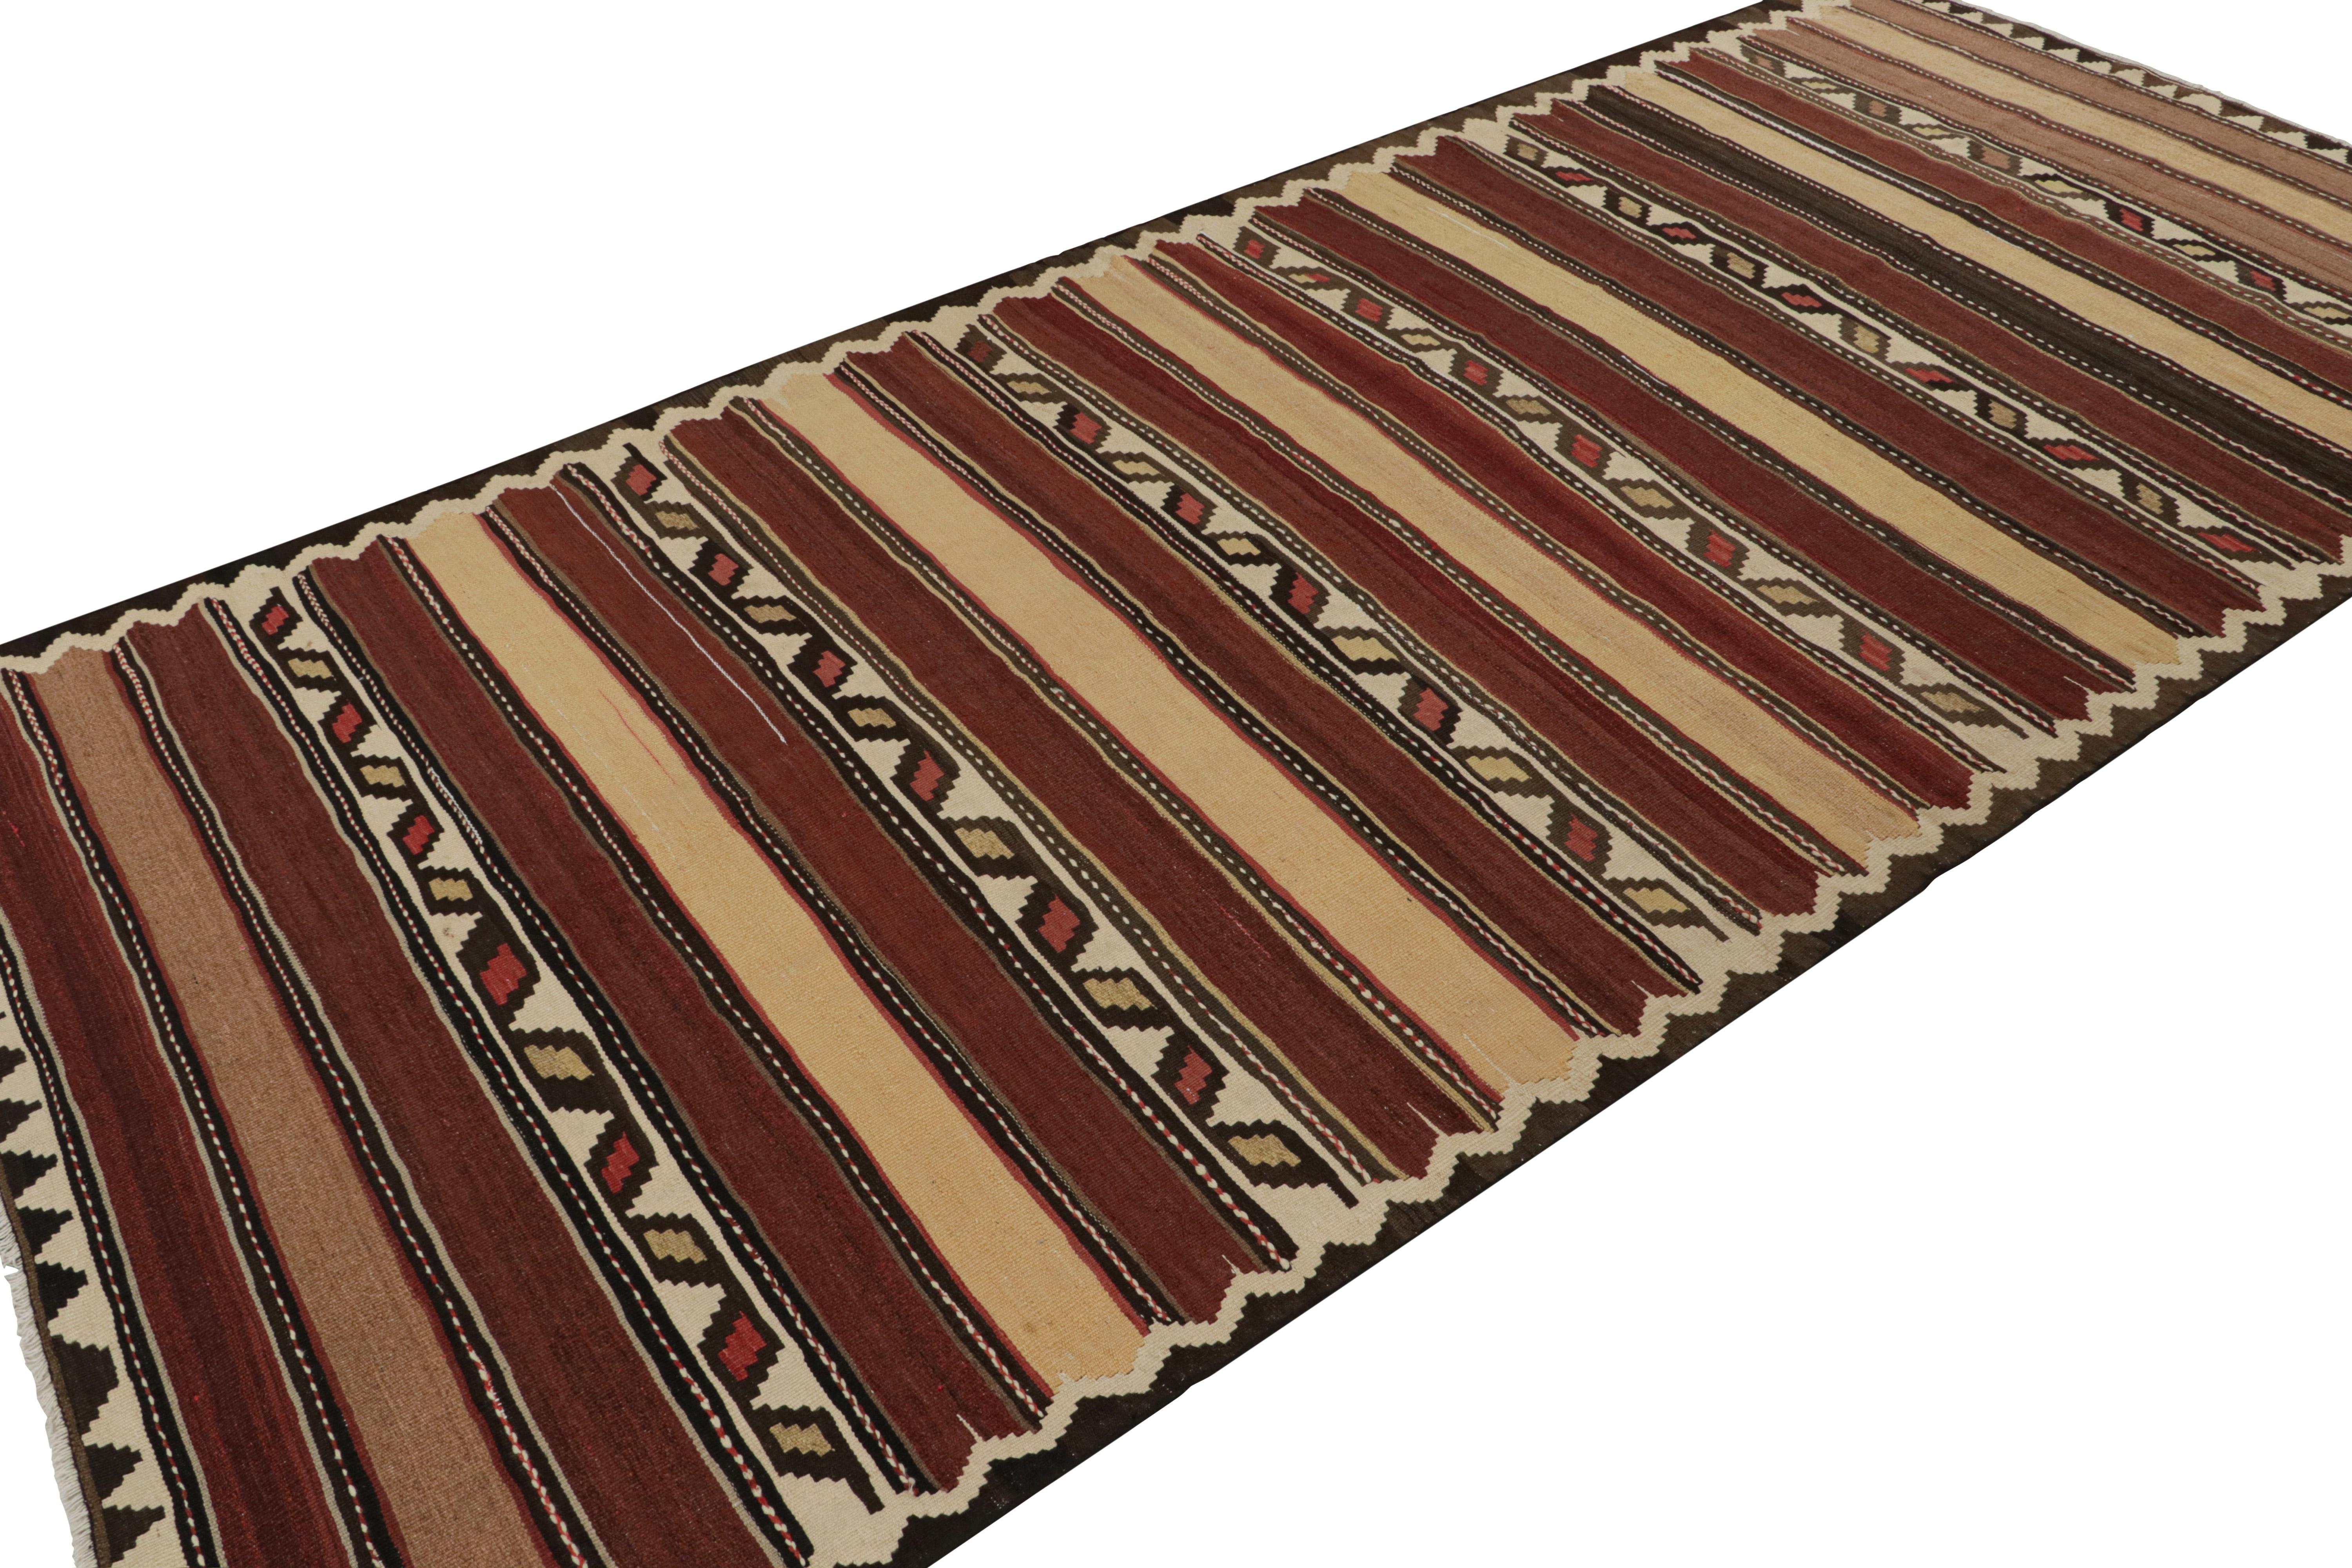 Handwoven in wool, circa 1950-1960, this 5x11 vintage Afghan tribal kilim rug, is an exciting new curation in the Rug & Kilim collection. 

On the Design: 

Connoisseurs will admire the striped pattern of this design, which is reflective of